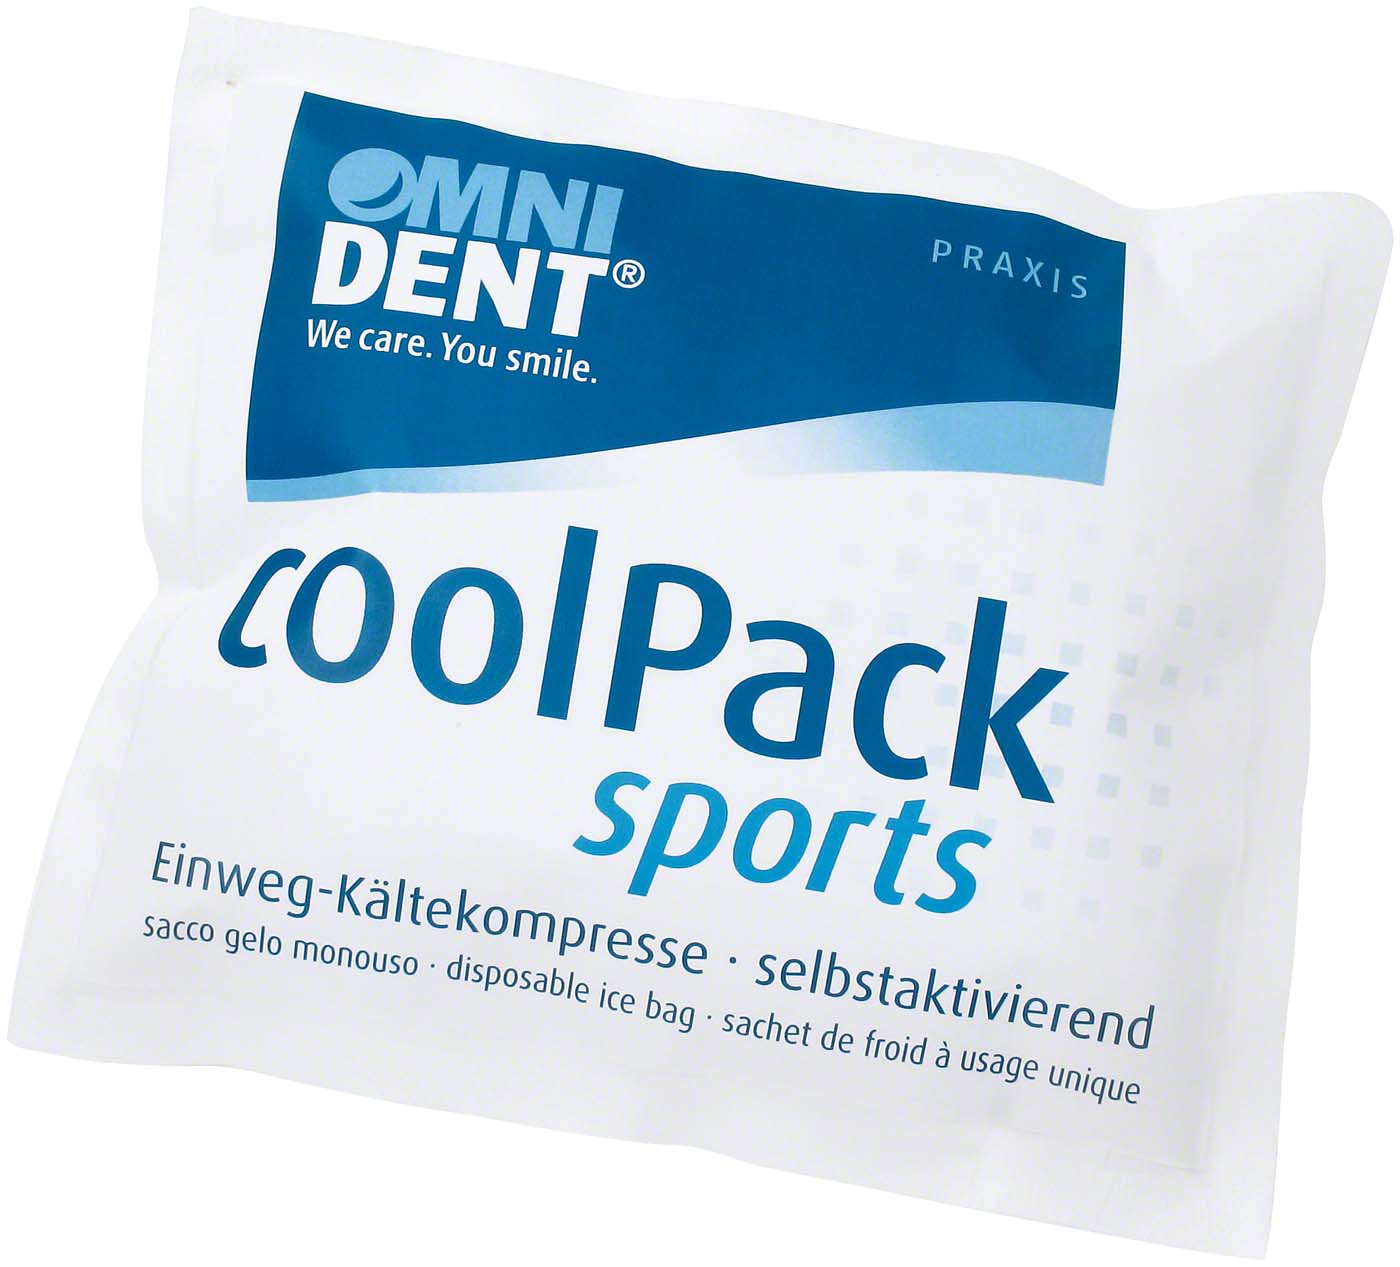 coolPack sports OMNIDENT